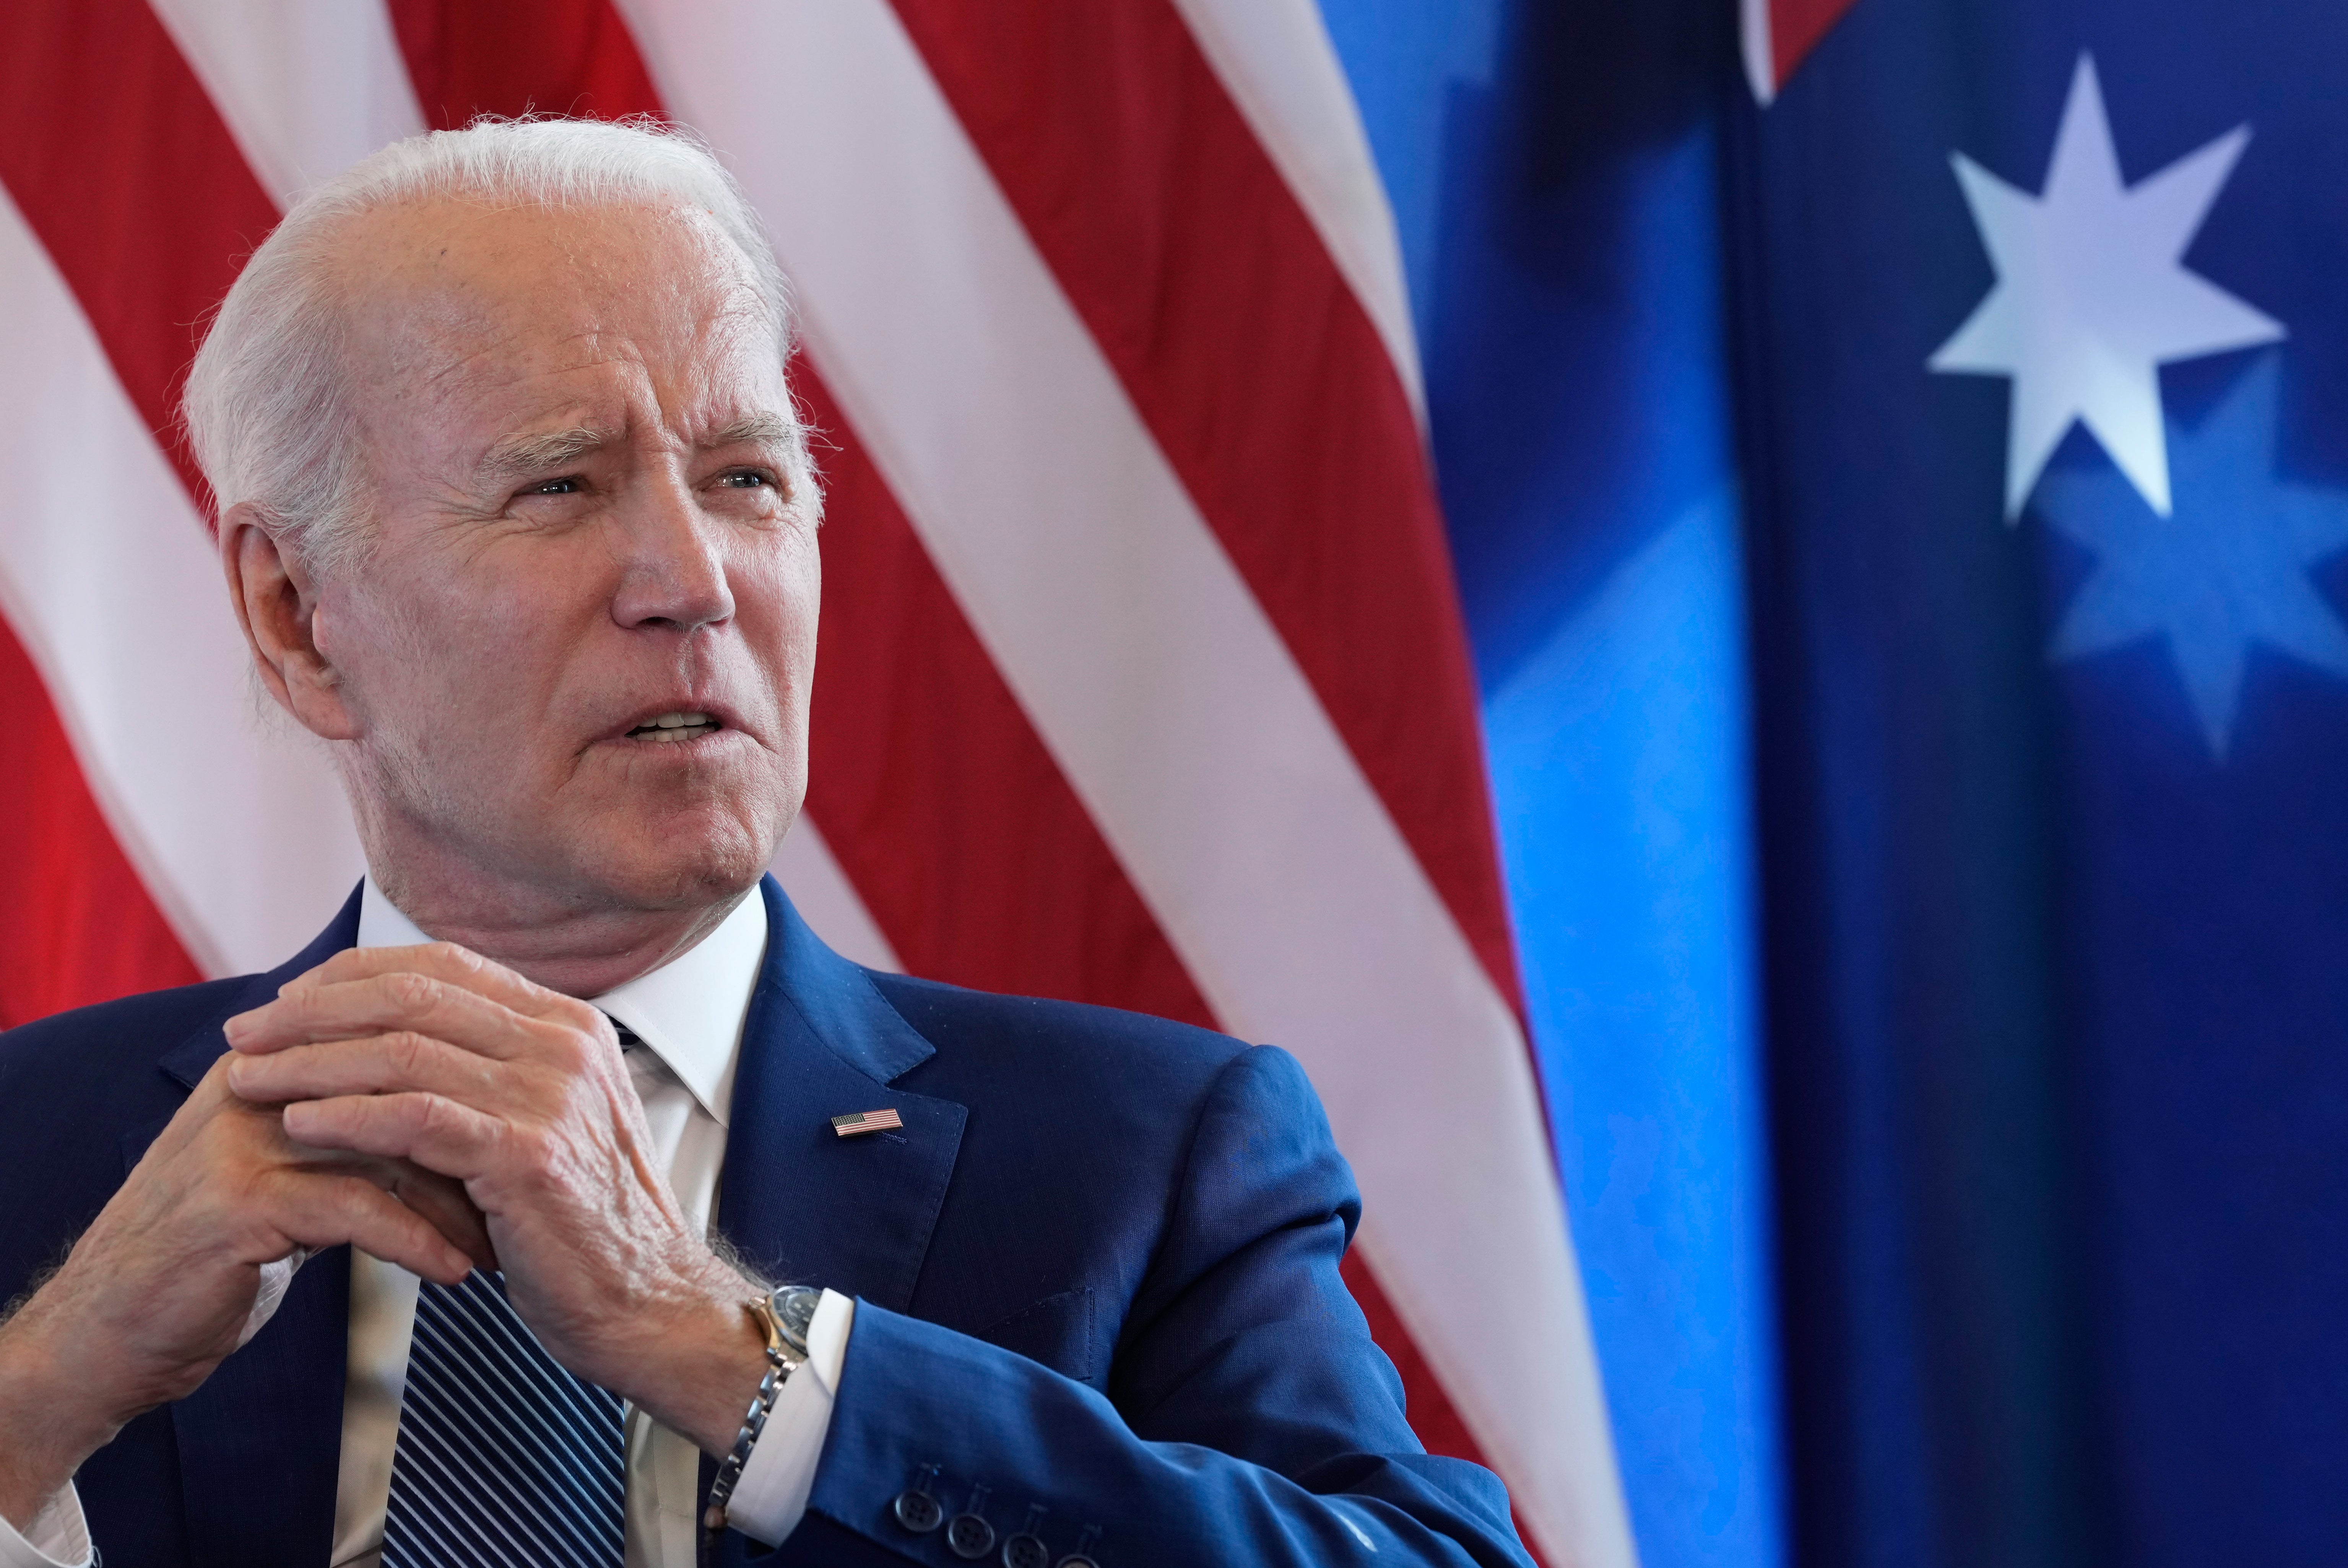 Joe Biden answers questions about the US debt limit before a bilateral meeting with Australian prime minister Anthony Albanese on the sidelines of the G7 summit in Hiroshima